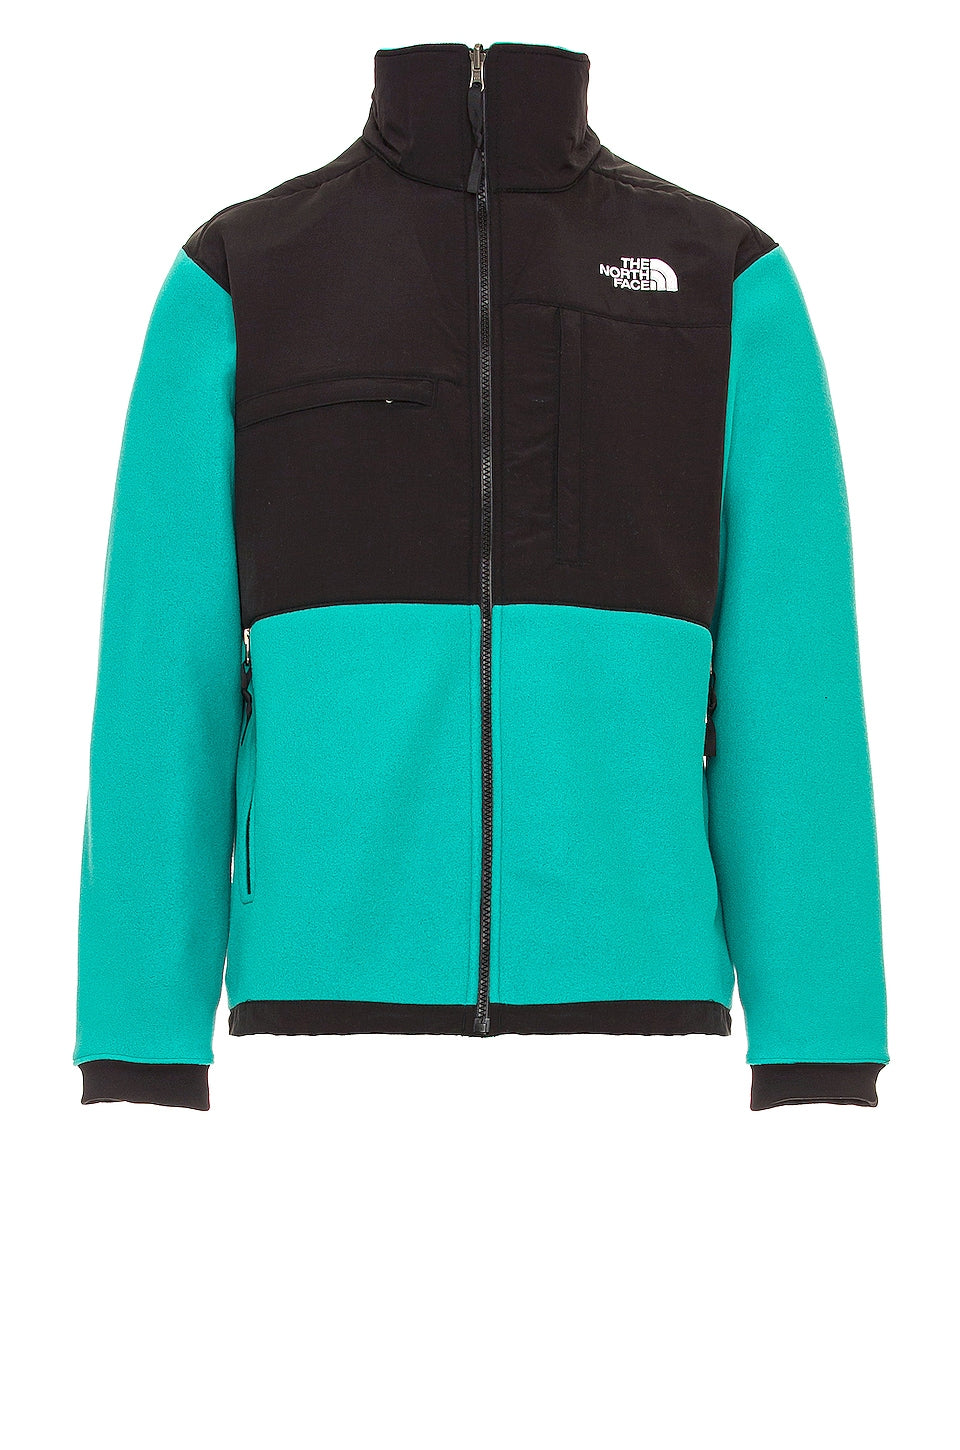 The North Face Reinvents the Denali Jacket with Help from REPREVE®